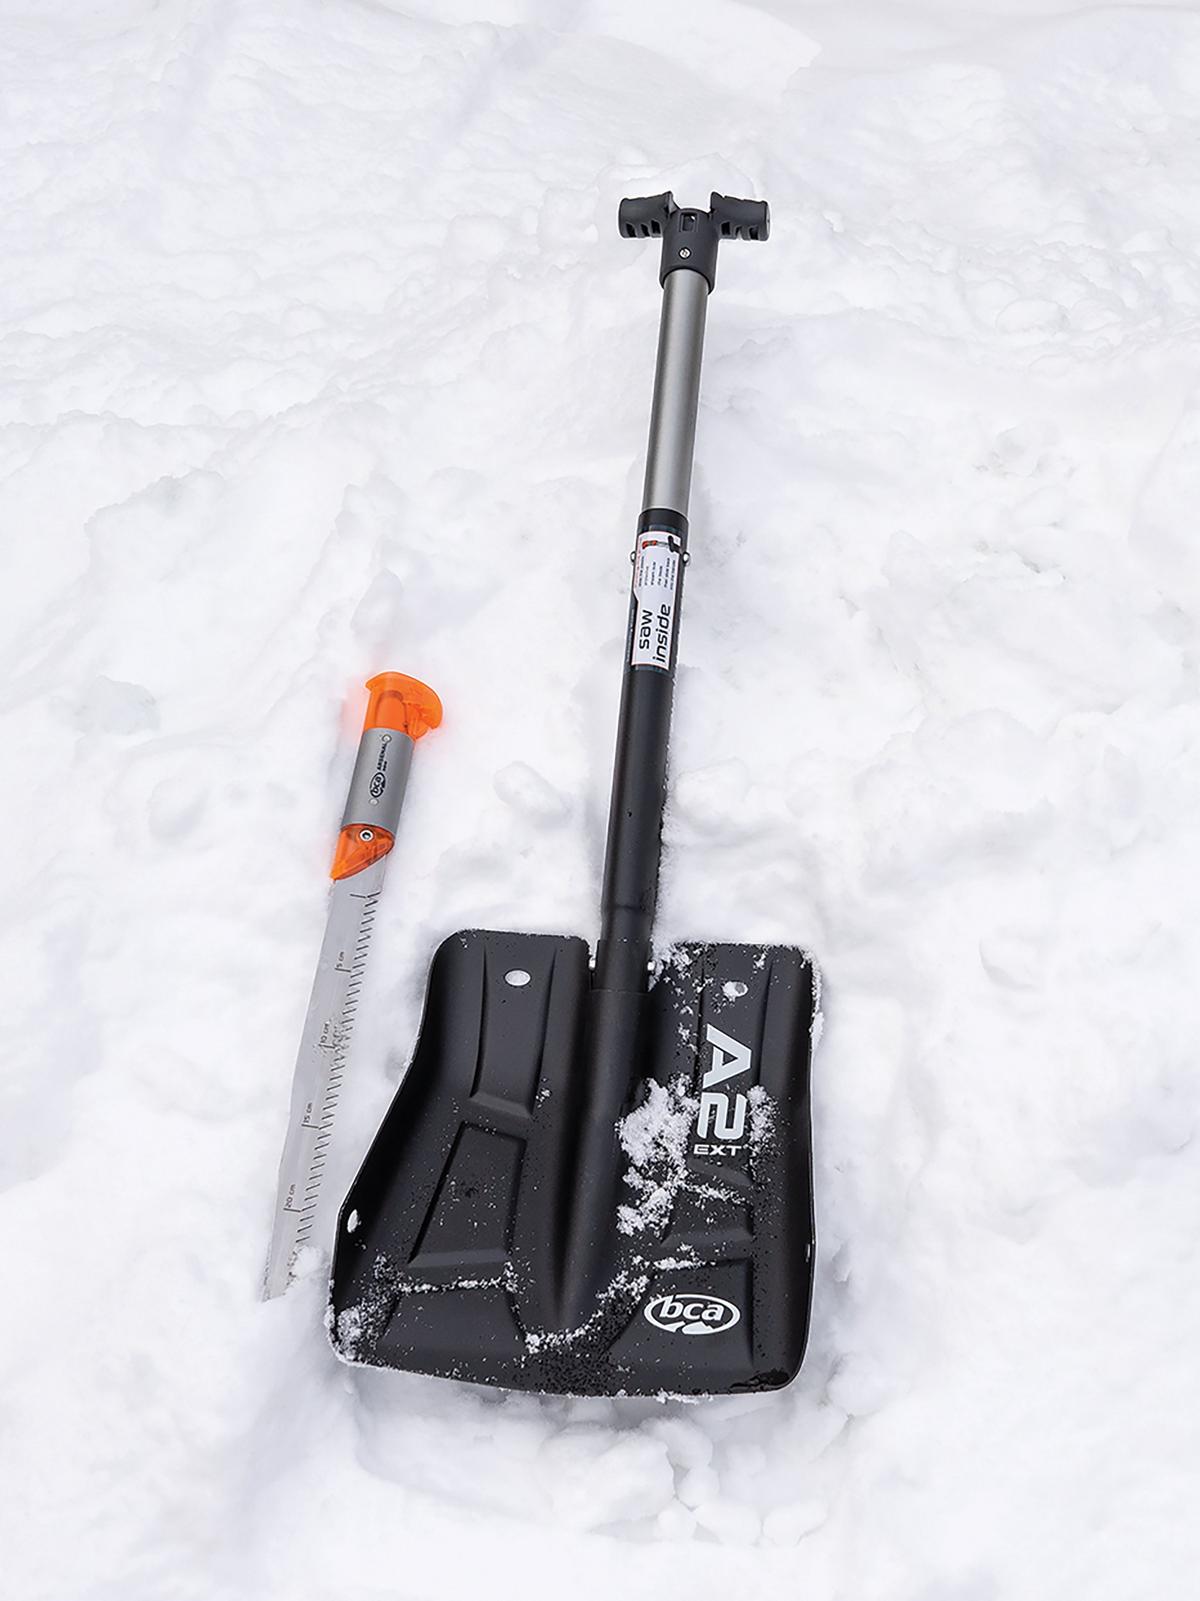 A-2 EXT Avalanche Shovel System with Saw | Backcountry Access